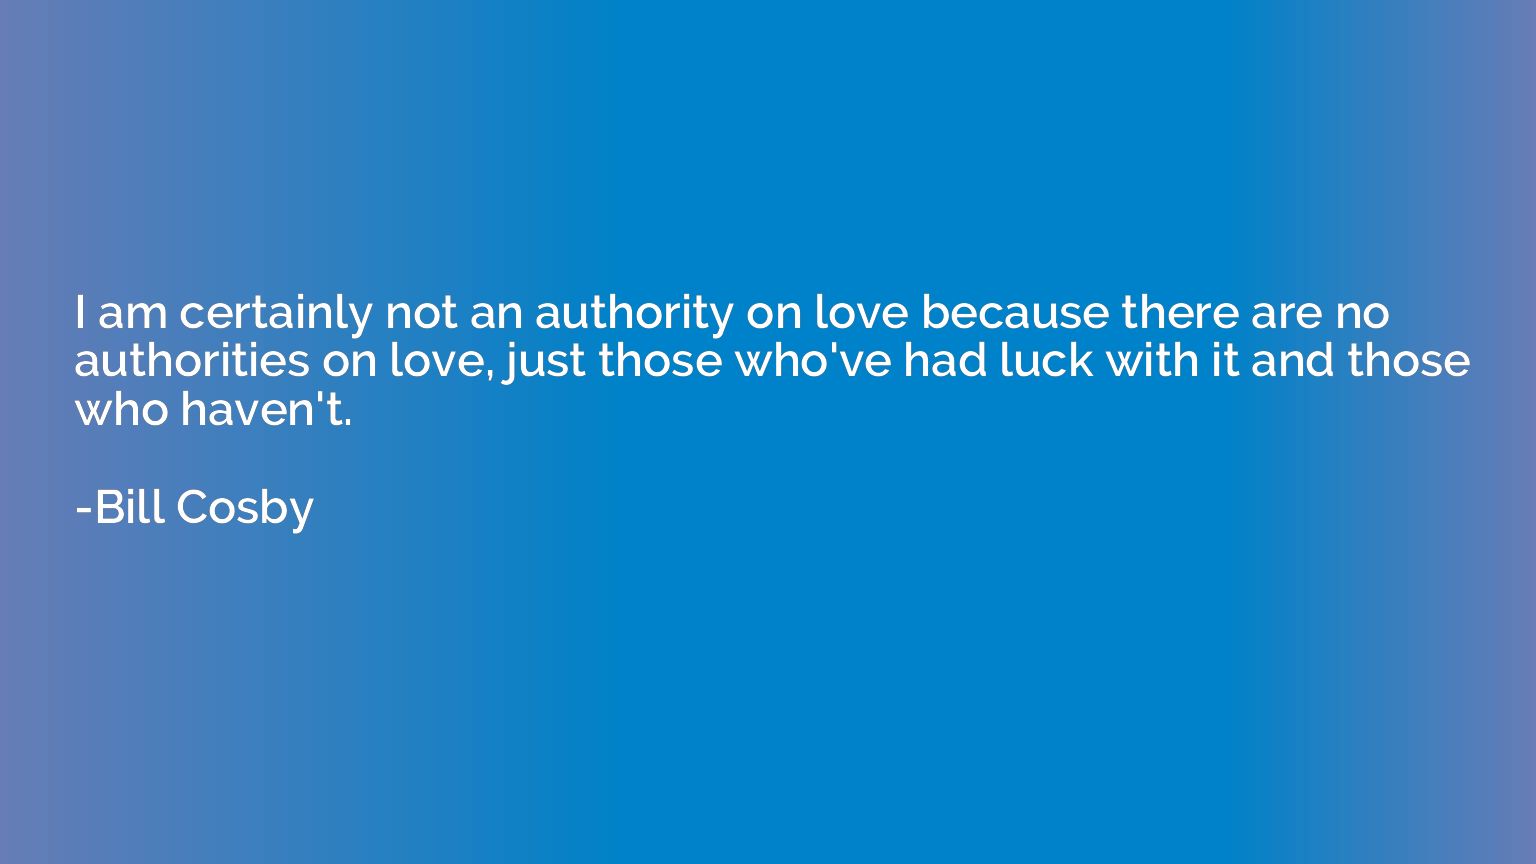 I am certainly not an authority on love because there are no